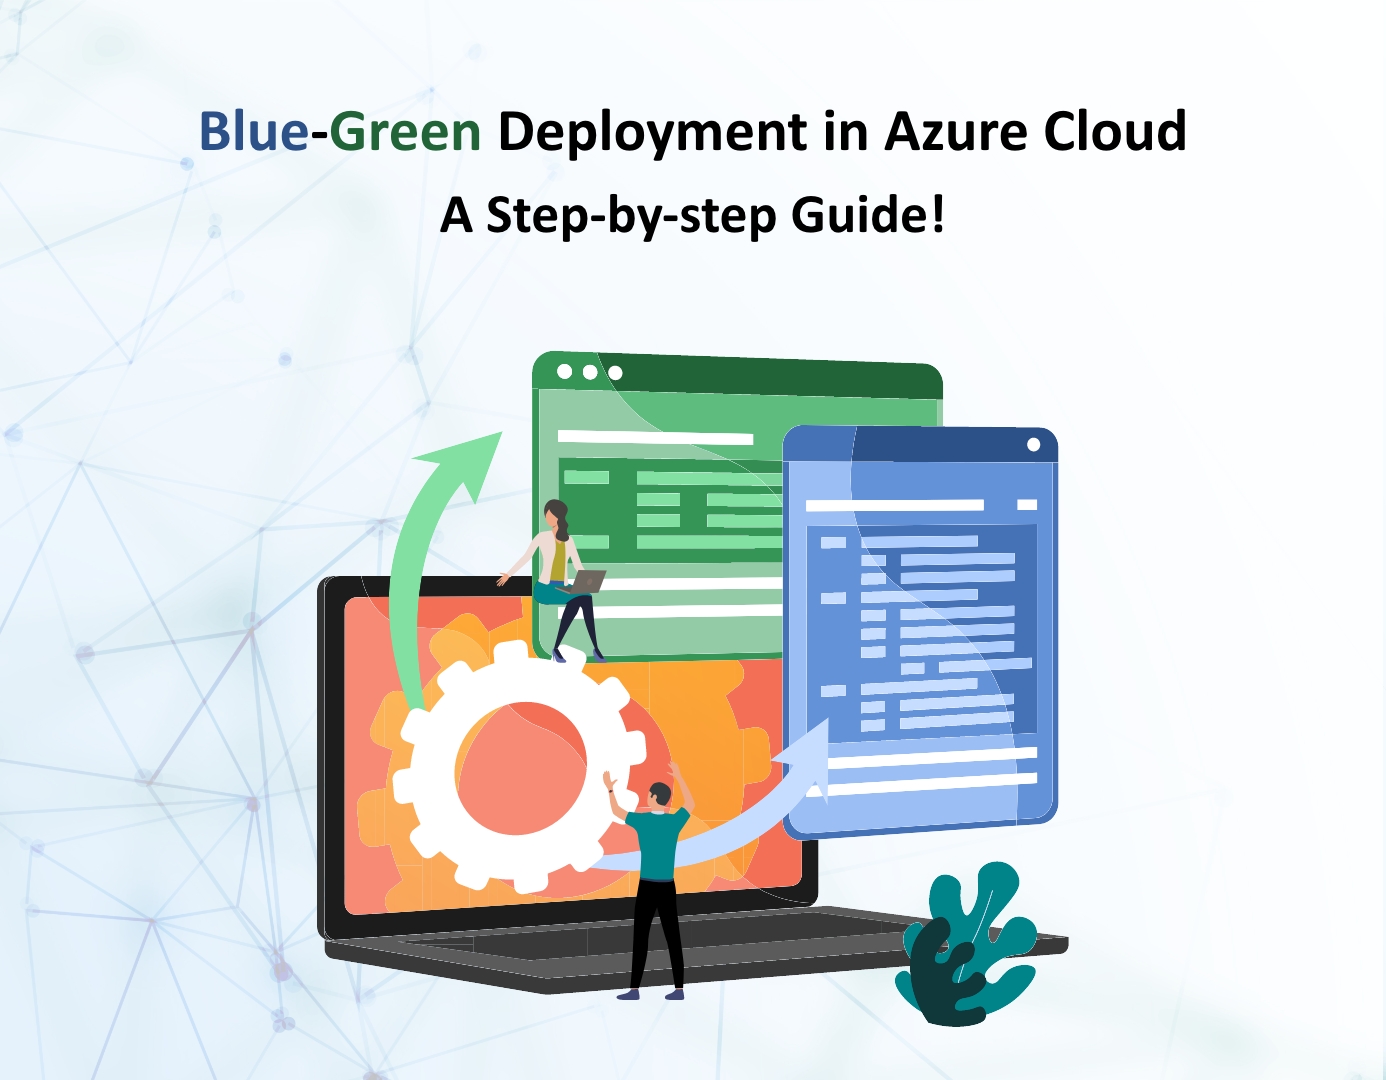 Blue-Green Deployment in Azure Cloud, depicting a transition from blue to green spheres, symbolizing smooth application updates.